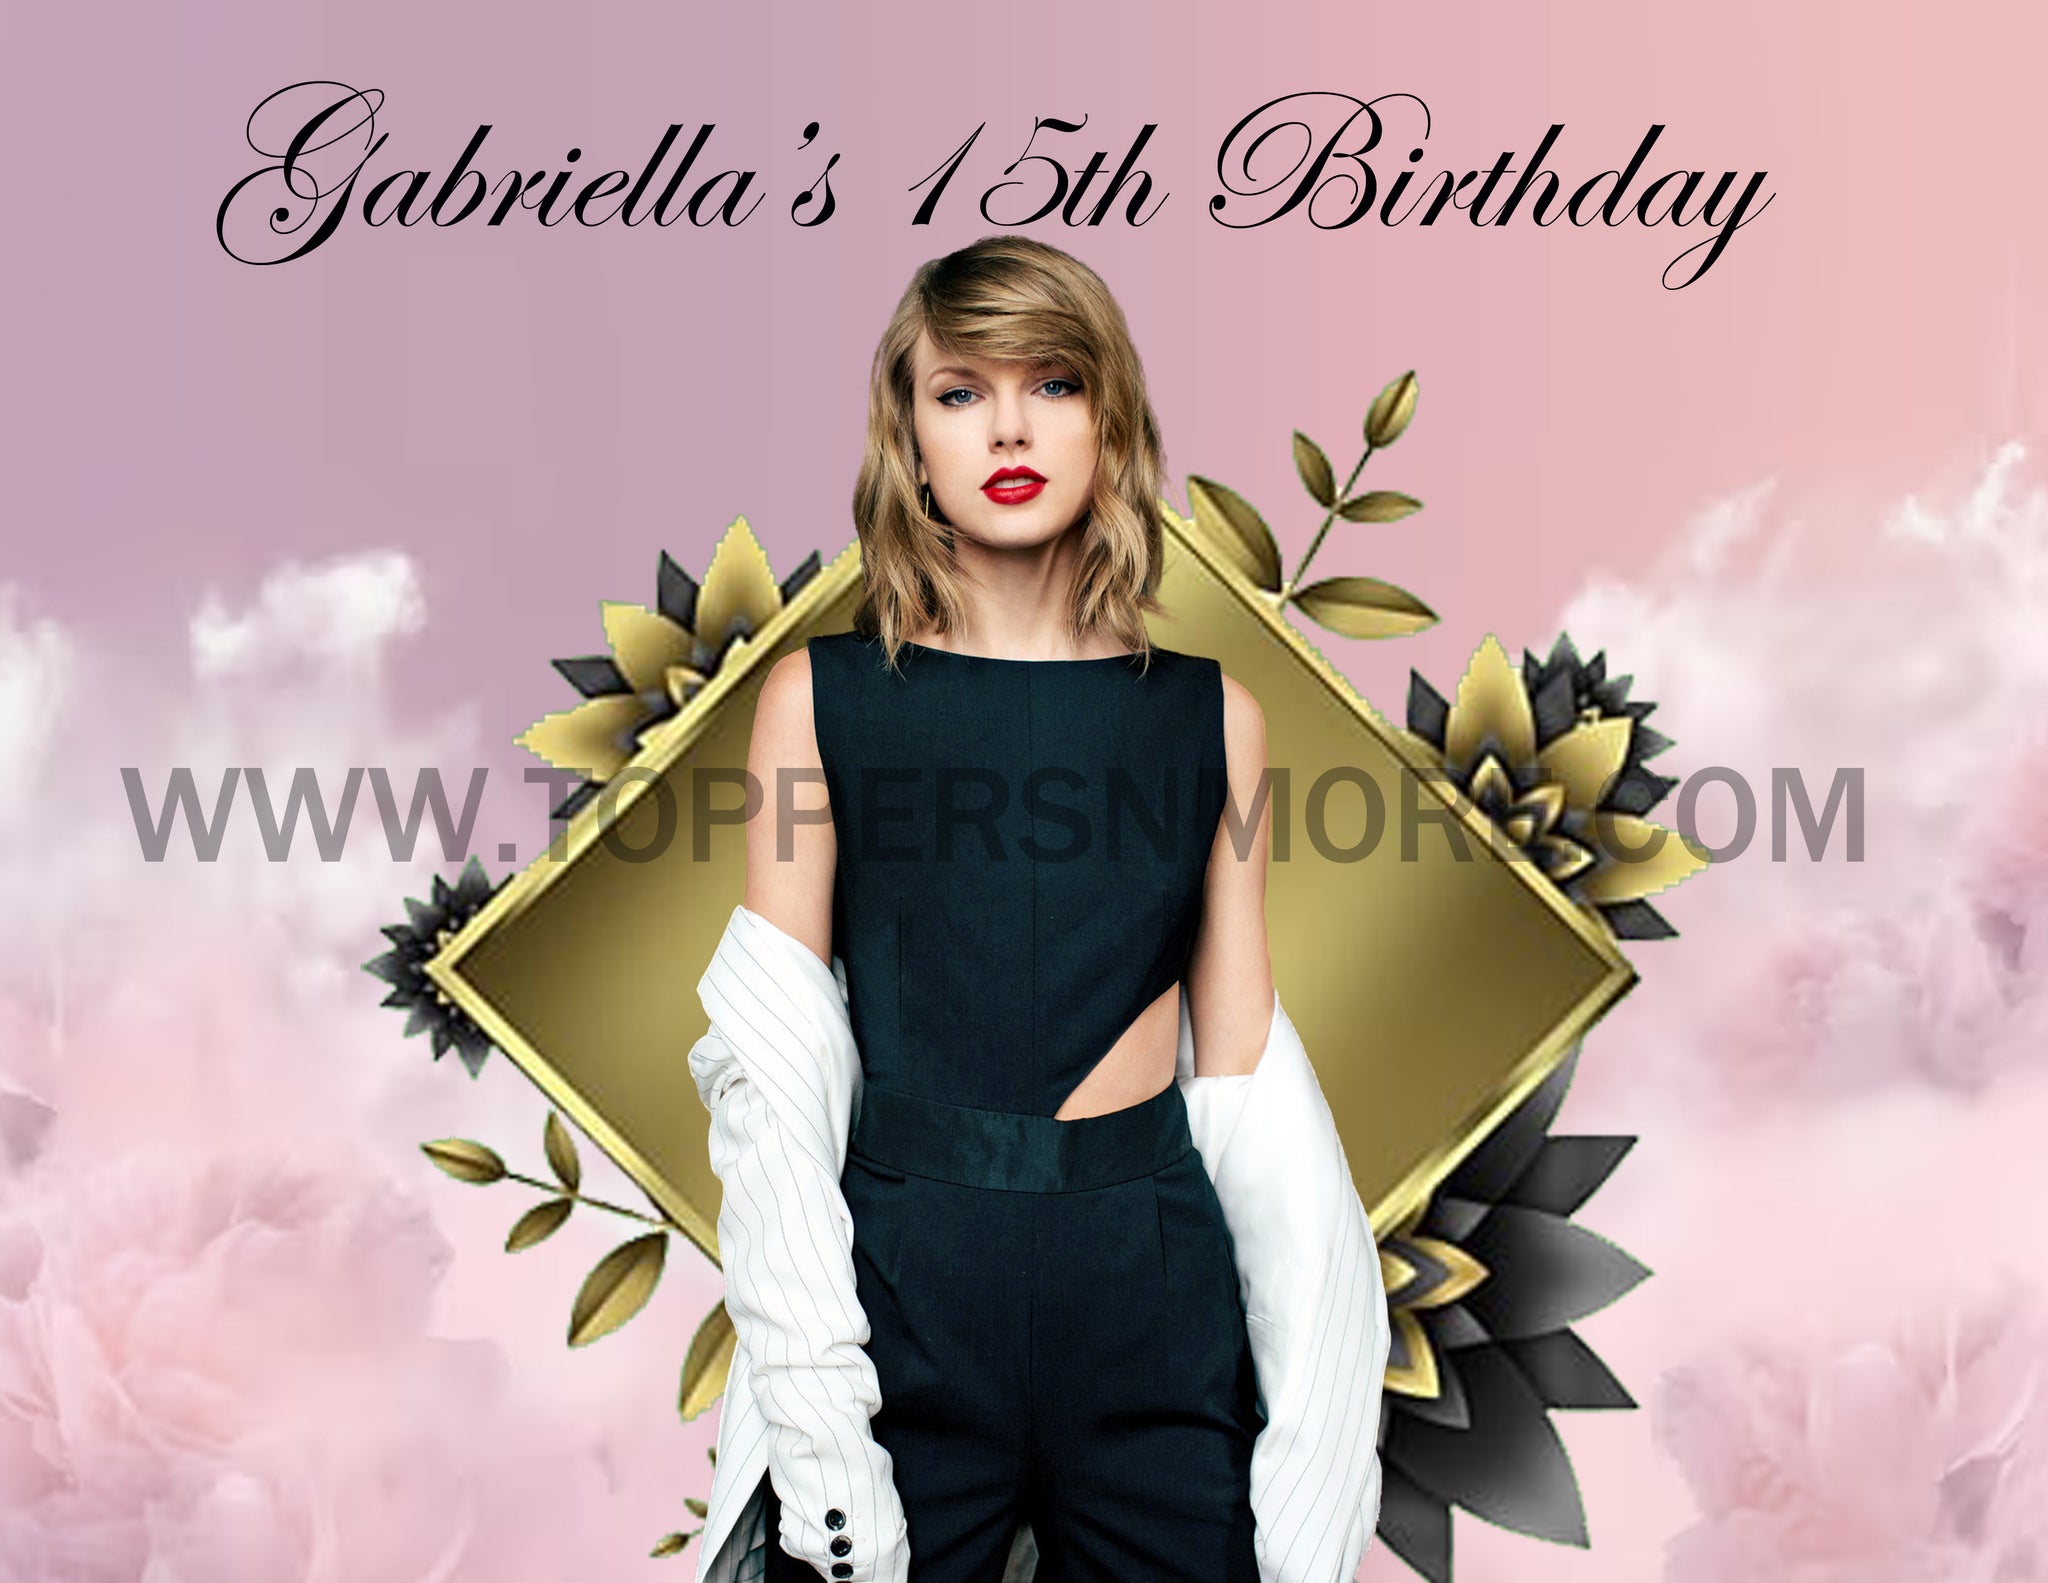 Taylor Swift Personalized Edible Print Premium Cake Toppers Frosting Sheets 5 Sizes